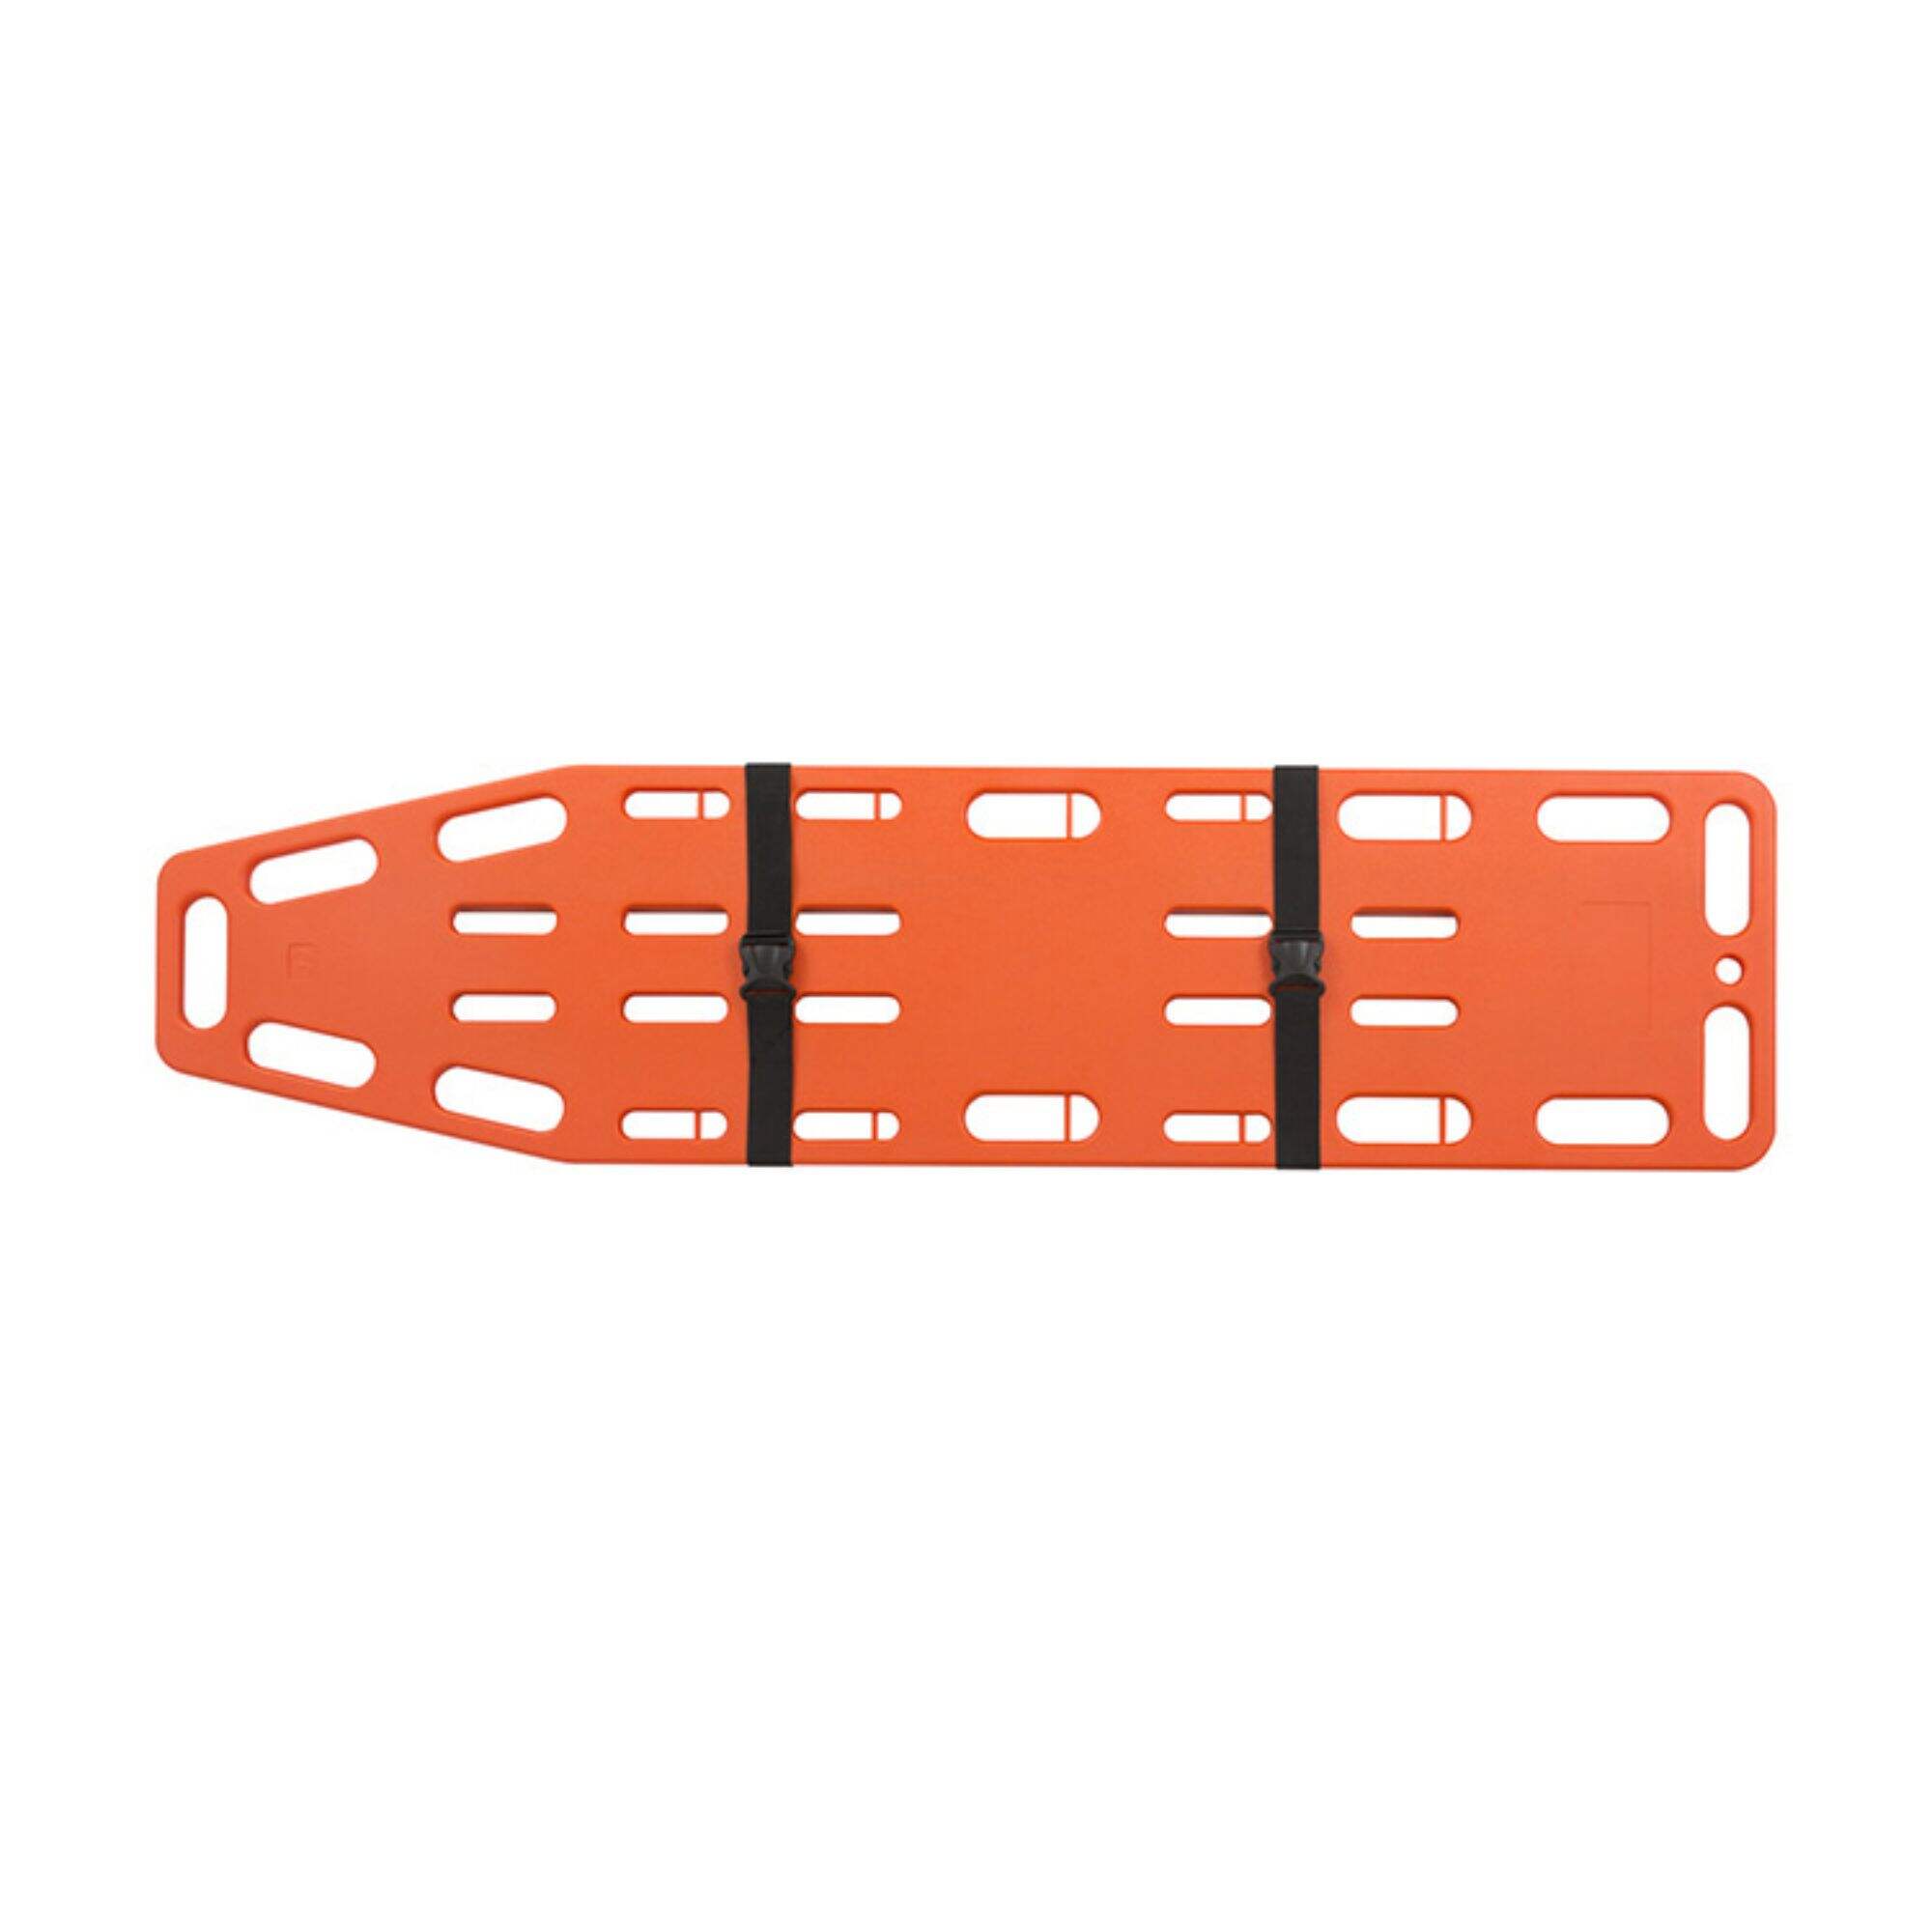 YXH-1A6C HDPE Material Rescue Spine Board 